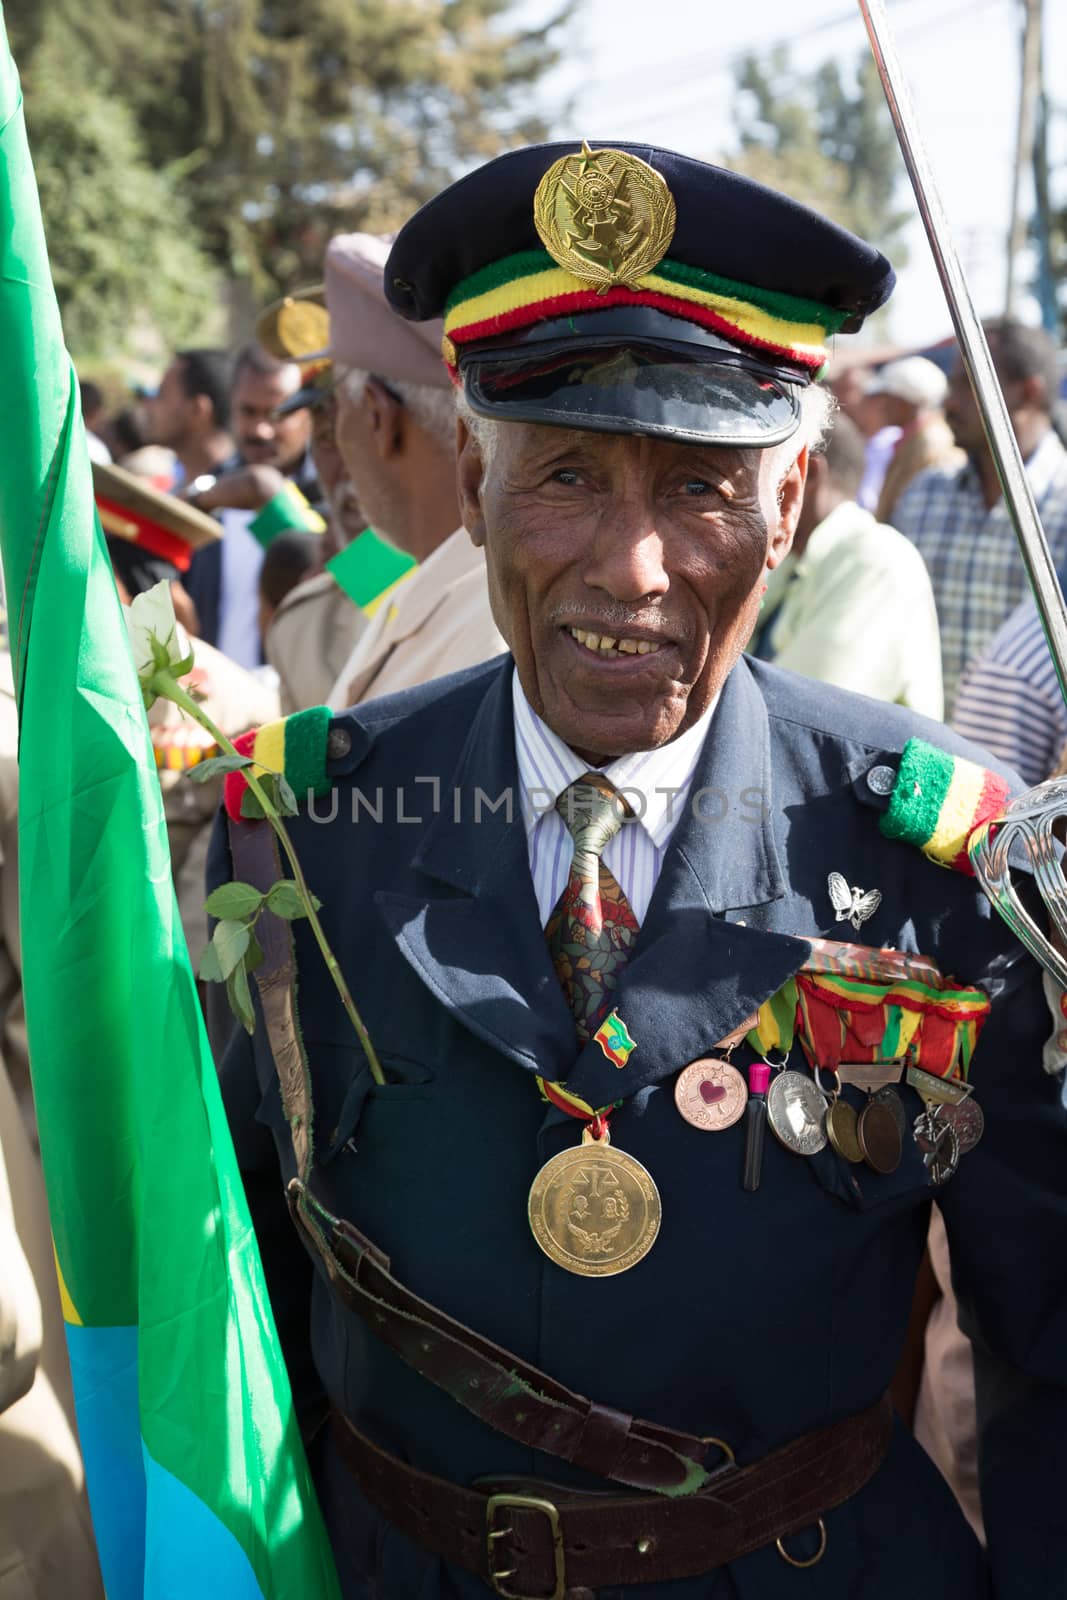 Addis Ababa - Sept 2: A decorated war veteran attends the celebrations of the 119th Anniversary of the Ethiopian Army"s victory over the invading Italian forces in the 1896 battle of Adwa. September 2, 2015, Addis Ababa, Ethiopia.